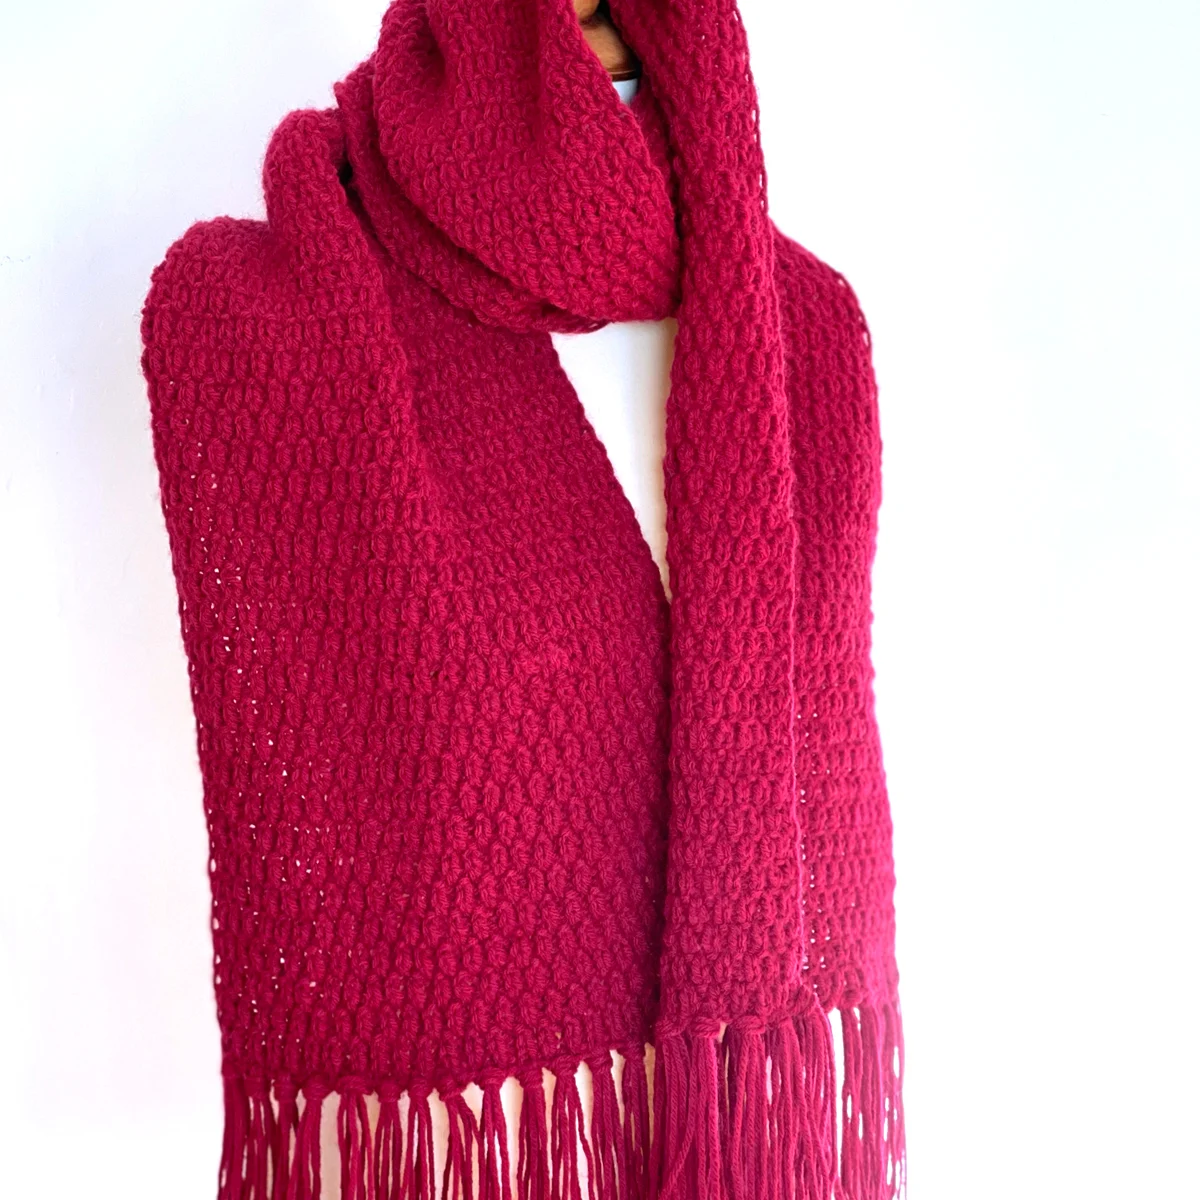 All Too Well Scarf in burgundy color yarn with fringe tassels by Studio Knit.